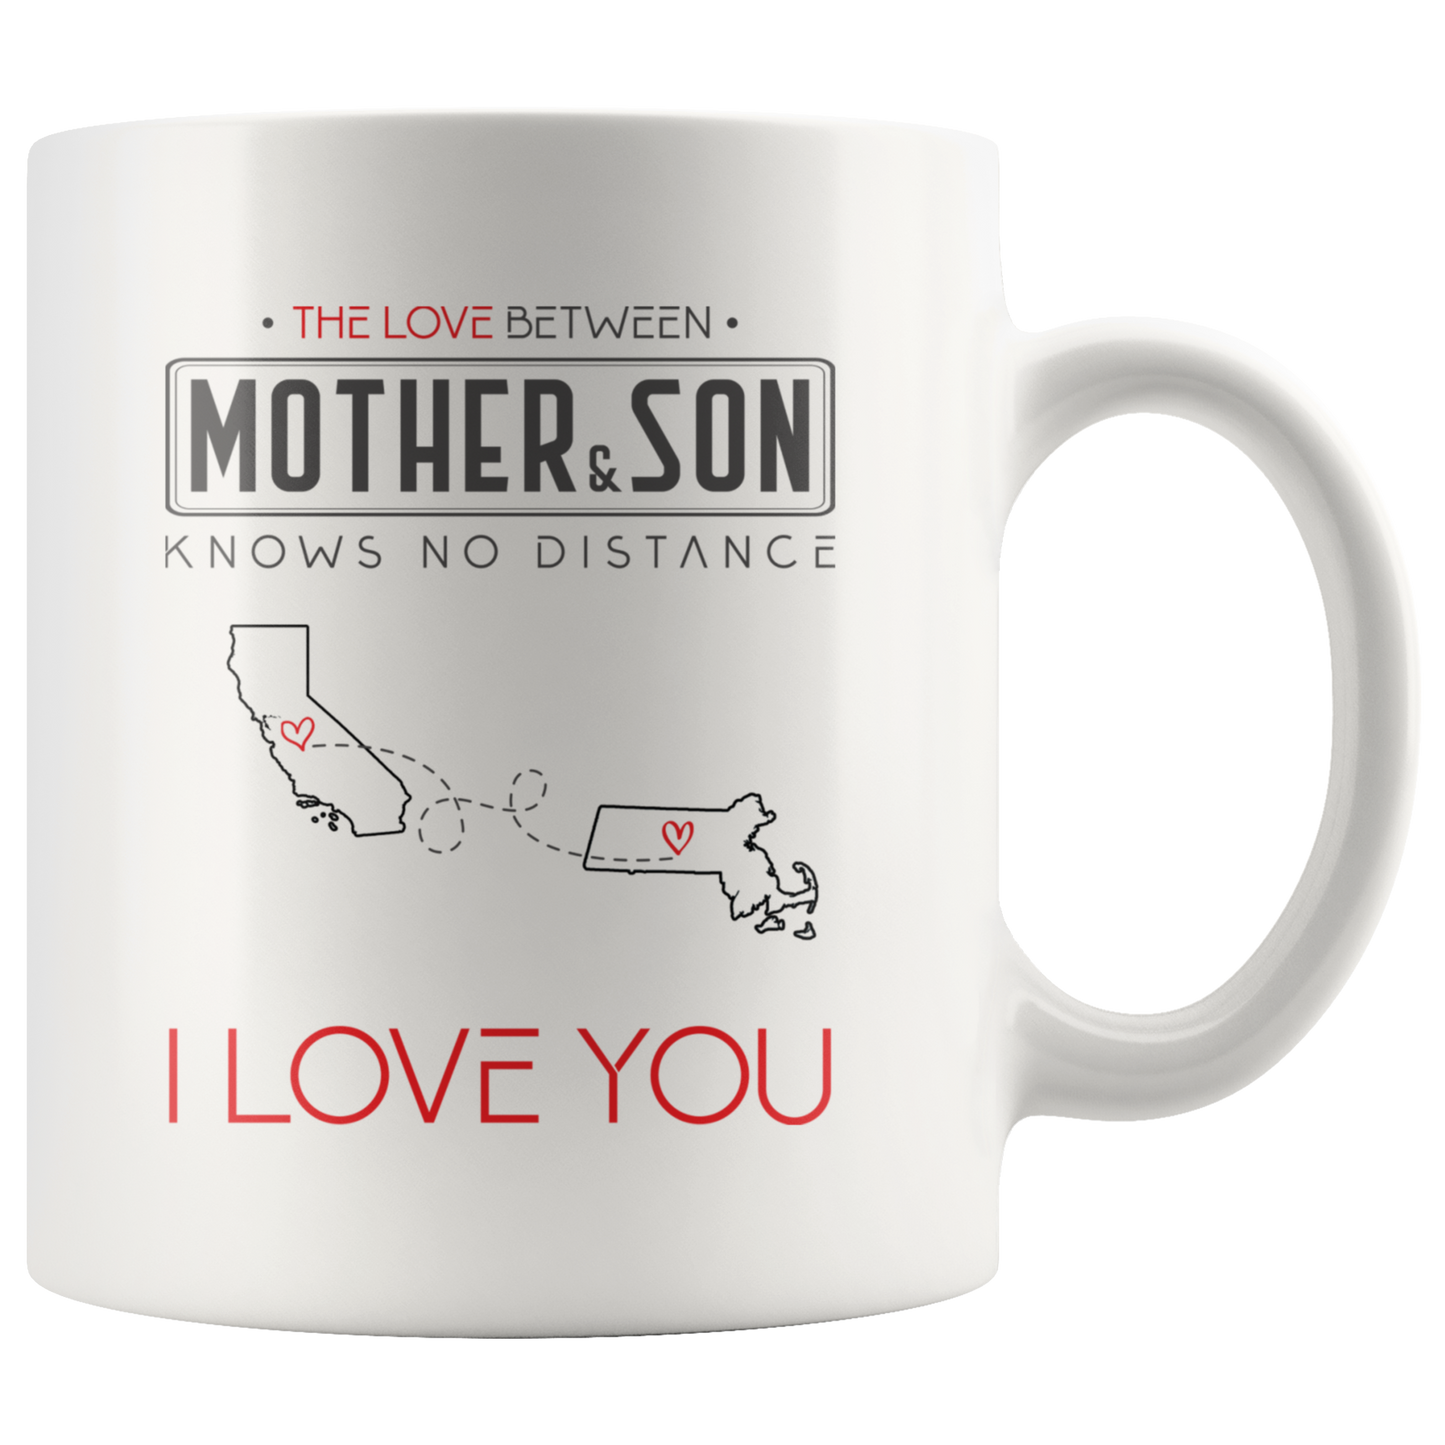 ND-21315298-sp-23496 - Mom And Son Accent Mug 11 oz Red - The Love Between Mother A